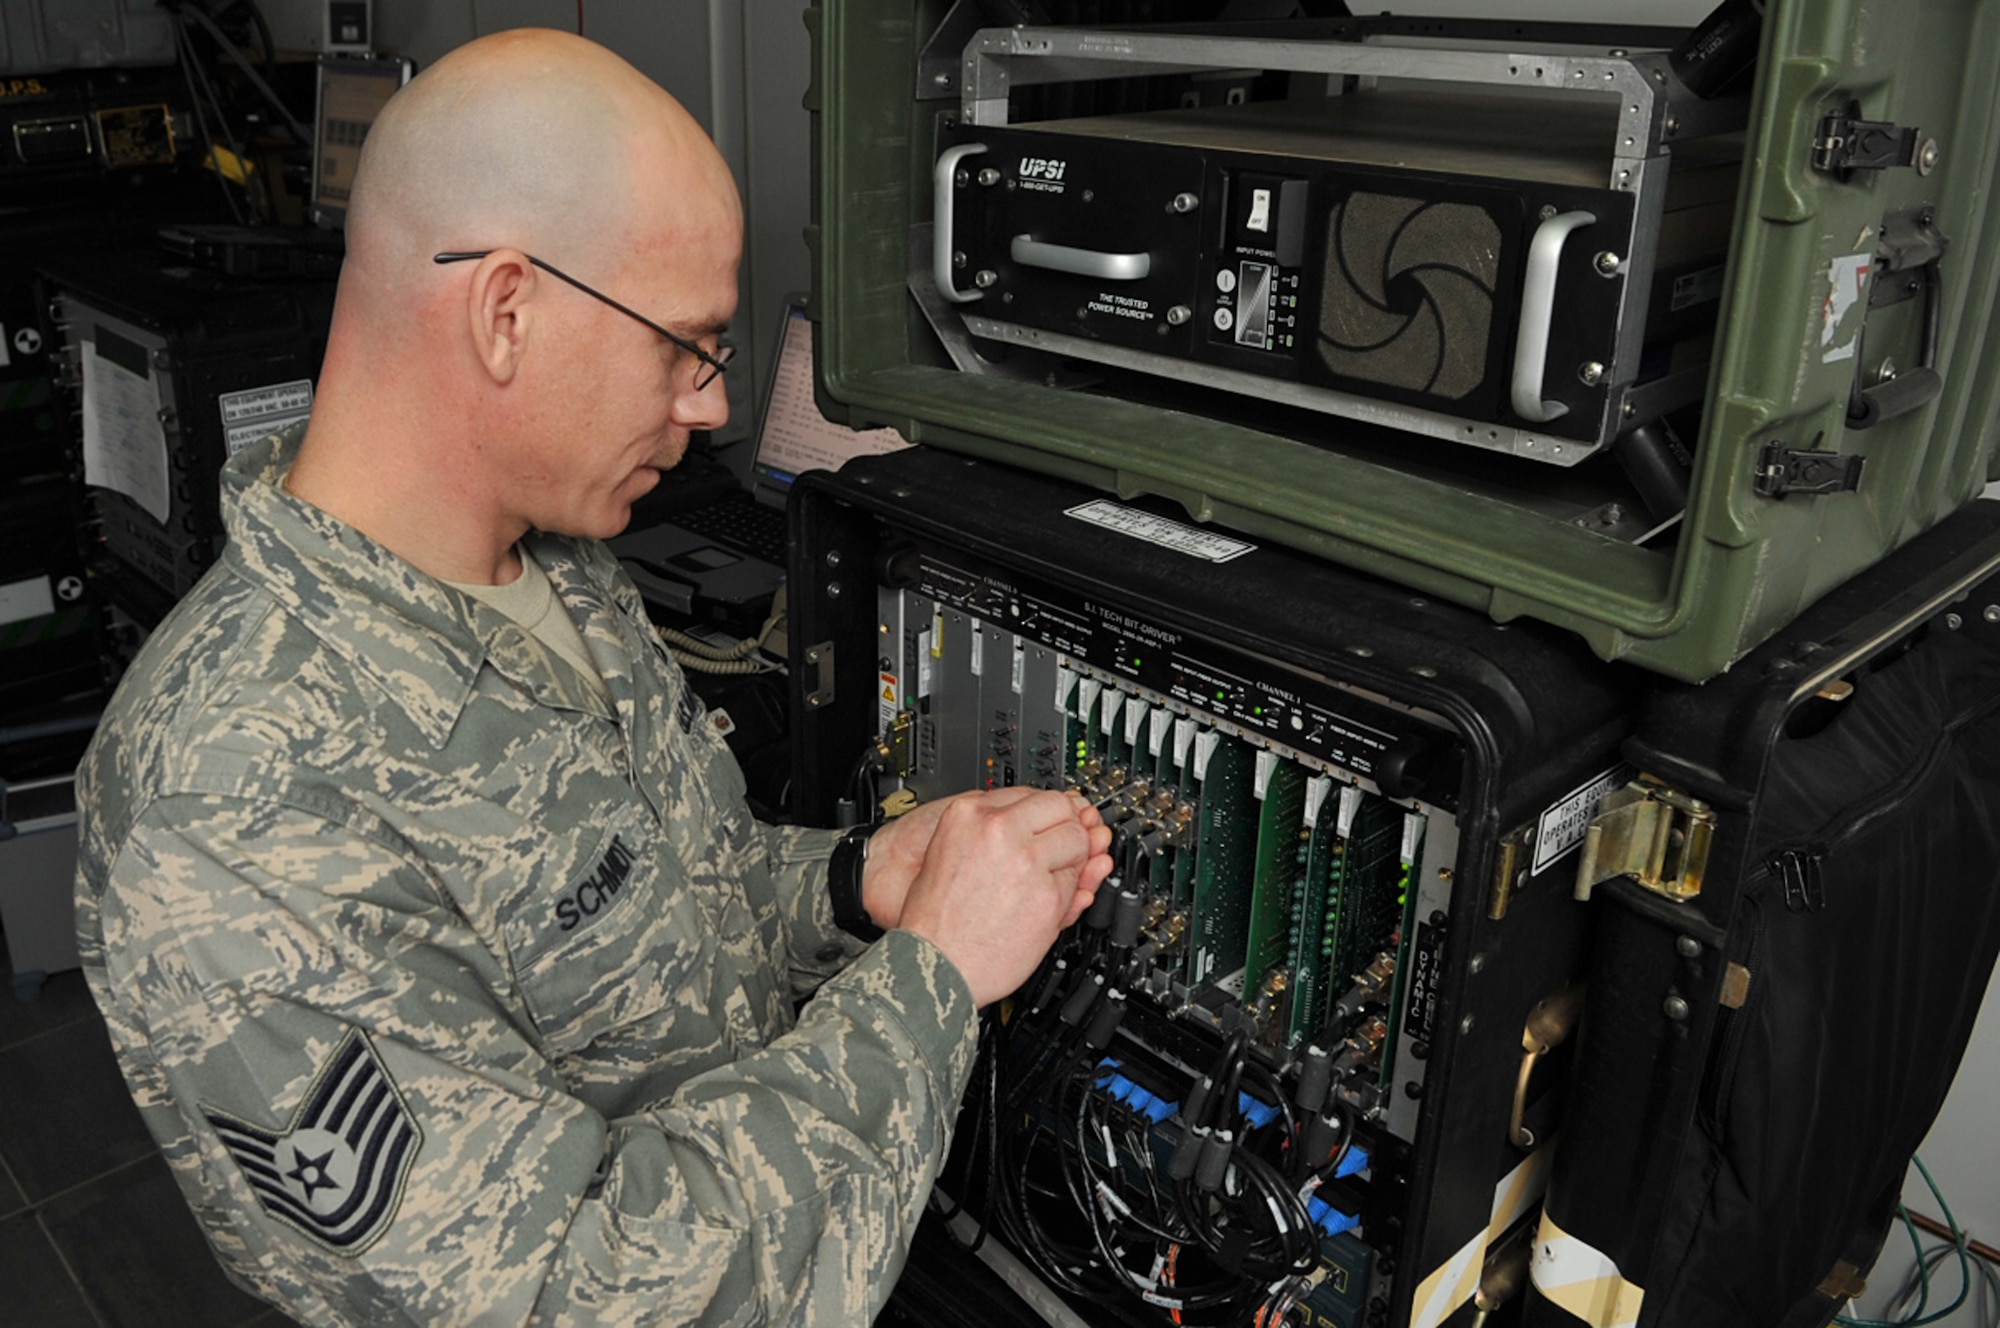 U.S. Air Force Tech. Sgt. Dennis Schmidt , transmission system technician, 1st Combat Communications Squadron, makes adjustments to a basic access module used to manage defense system network (DSN) lines, Krtsanisi National Training Center, Georgia, Feb. 9, 2010. Sergeant Schmidt is deployed to the Republic of Georgia to provide tactical communication support to the Marine Corps Training and Advisory Group as they teach combat skills to Georgian soldiers preparing to deploy to Afghanistan. (U.S. Air Force photo by Senior Airman Tony R. Ritter)